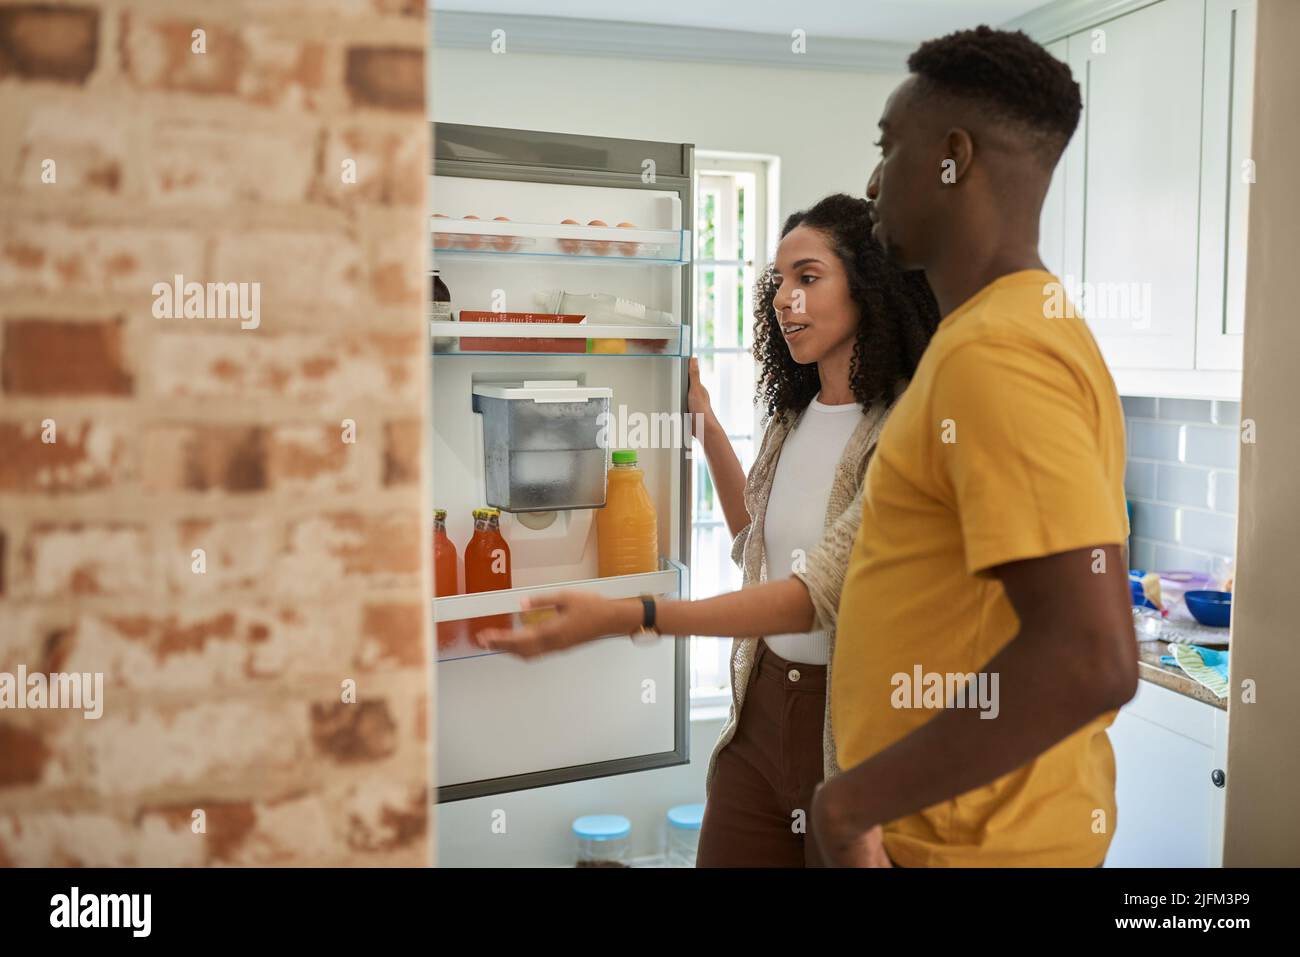 Young multiethnic couple standing together in their kitchen and looking in their refrigerator for something to make for a meal Stock Photo